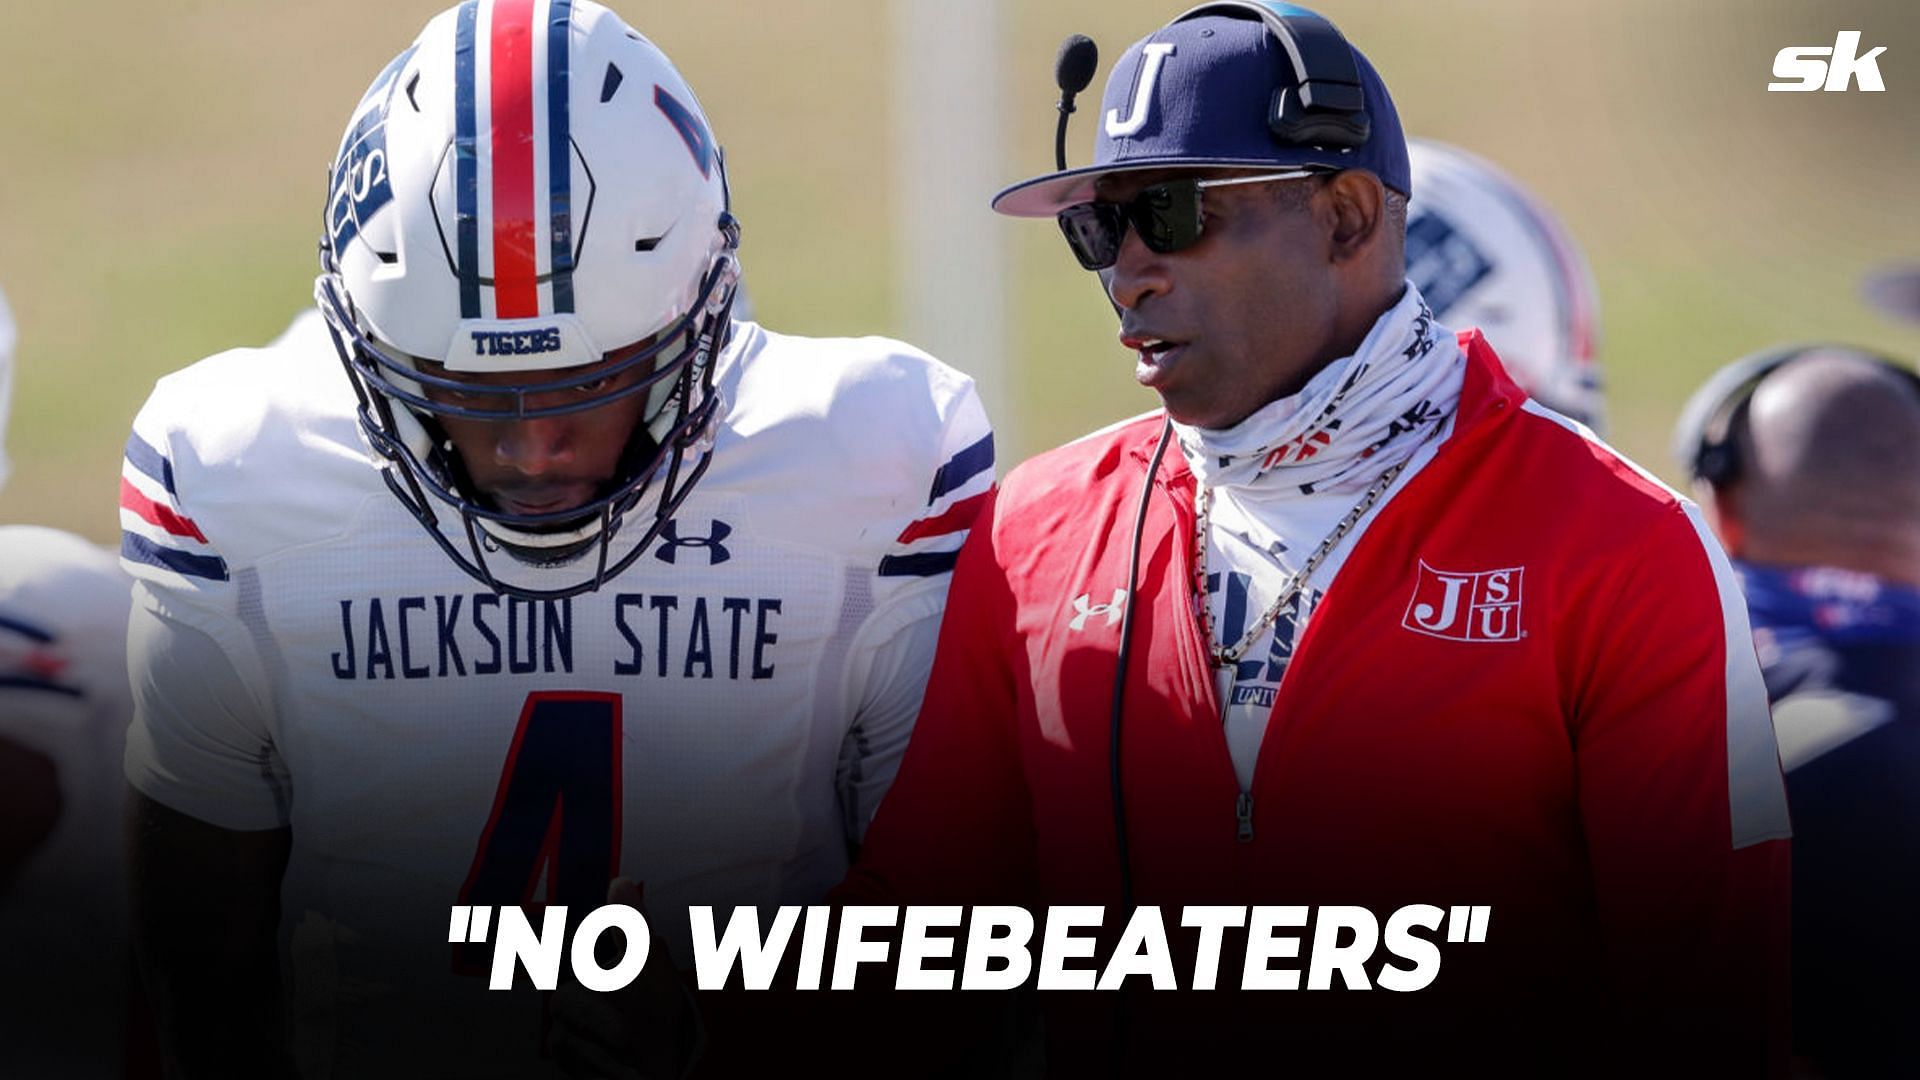 Deion Sanders has laid down the rules for his team